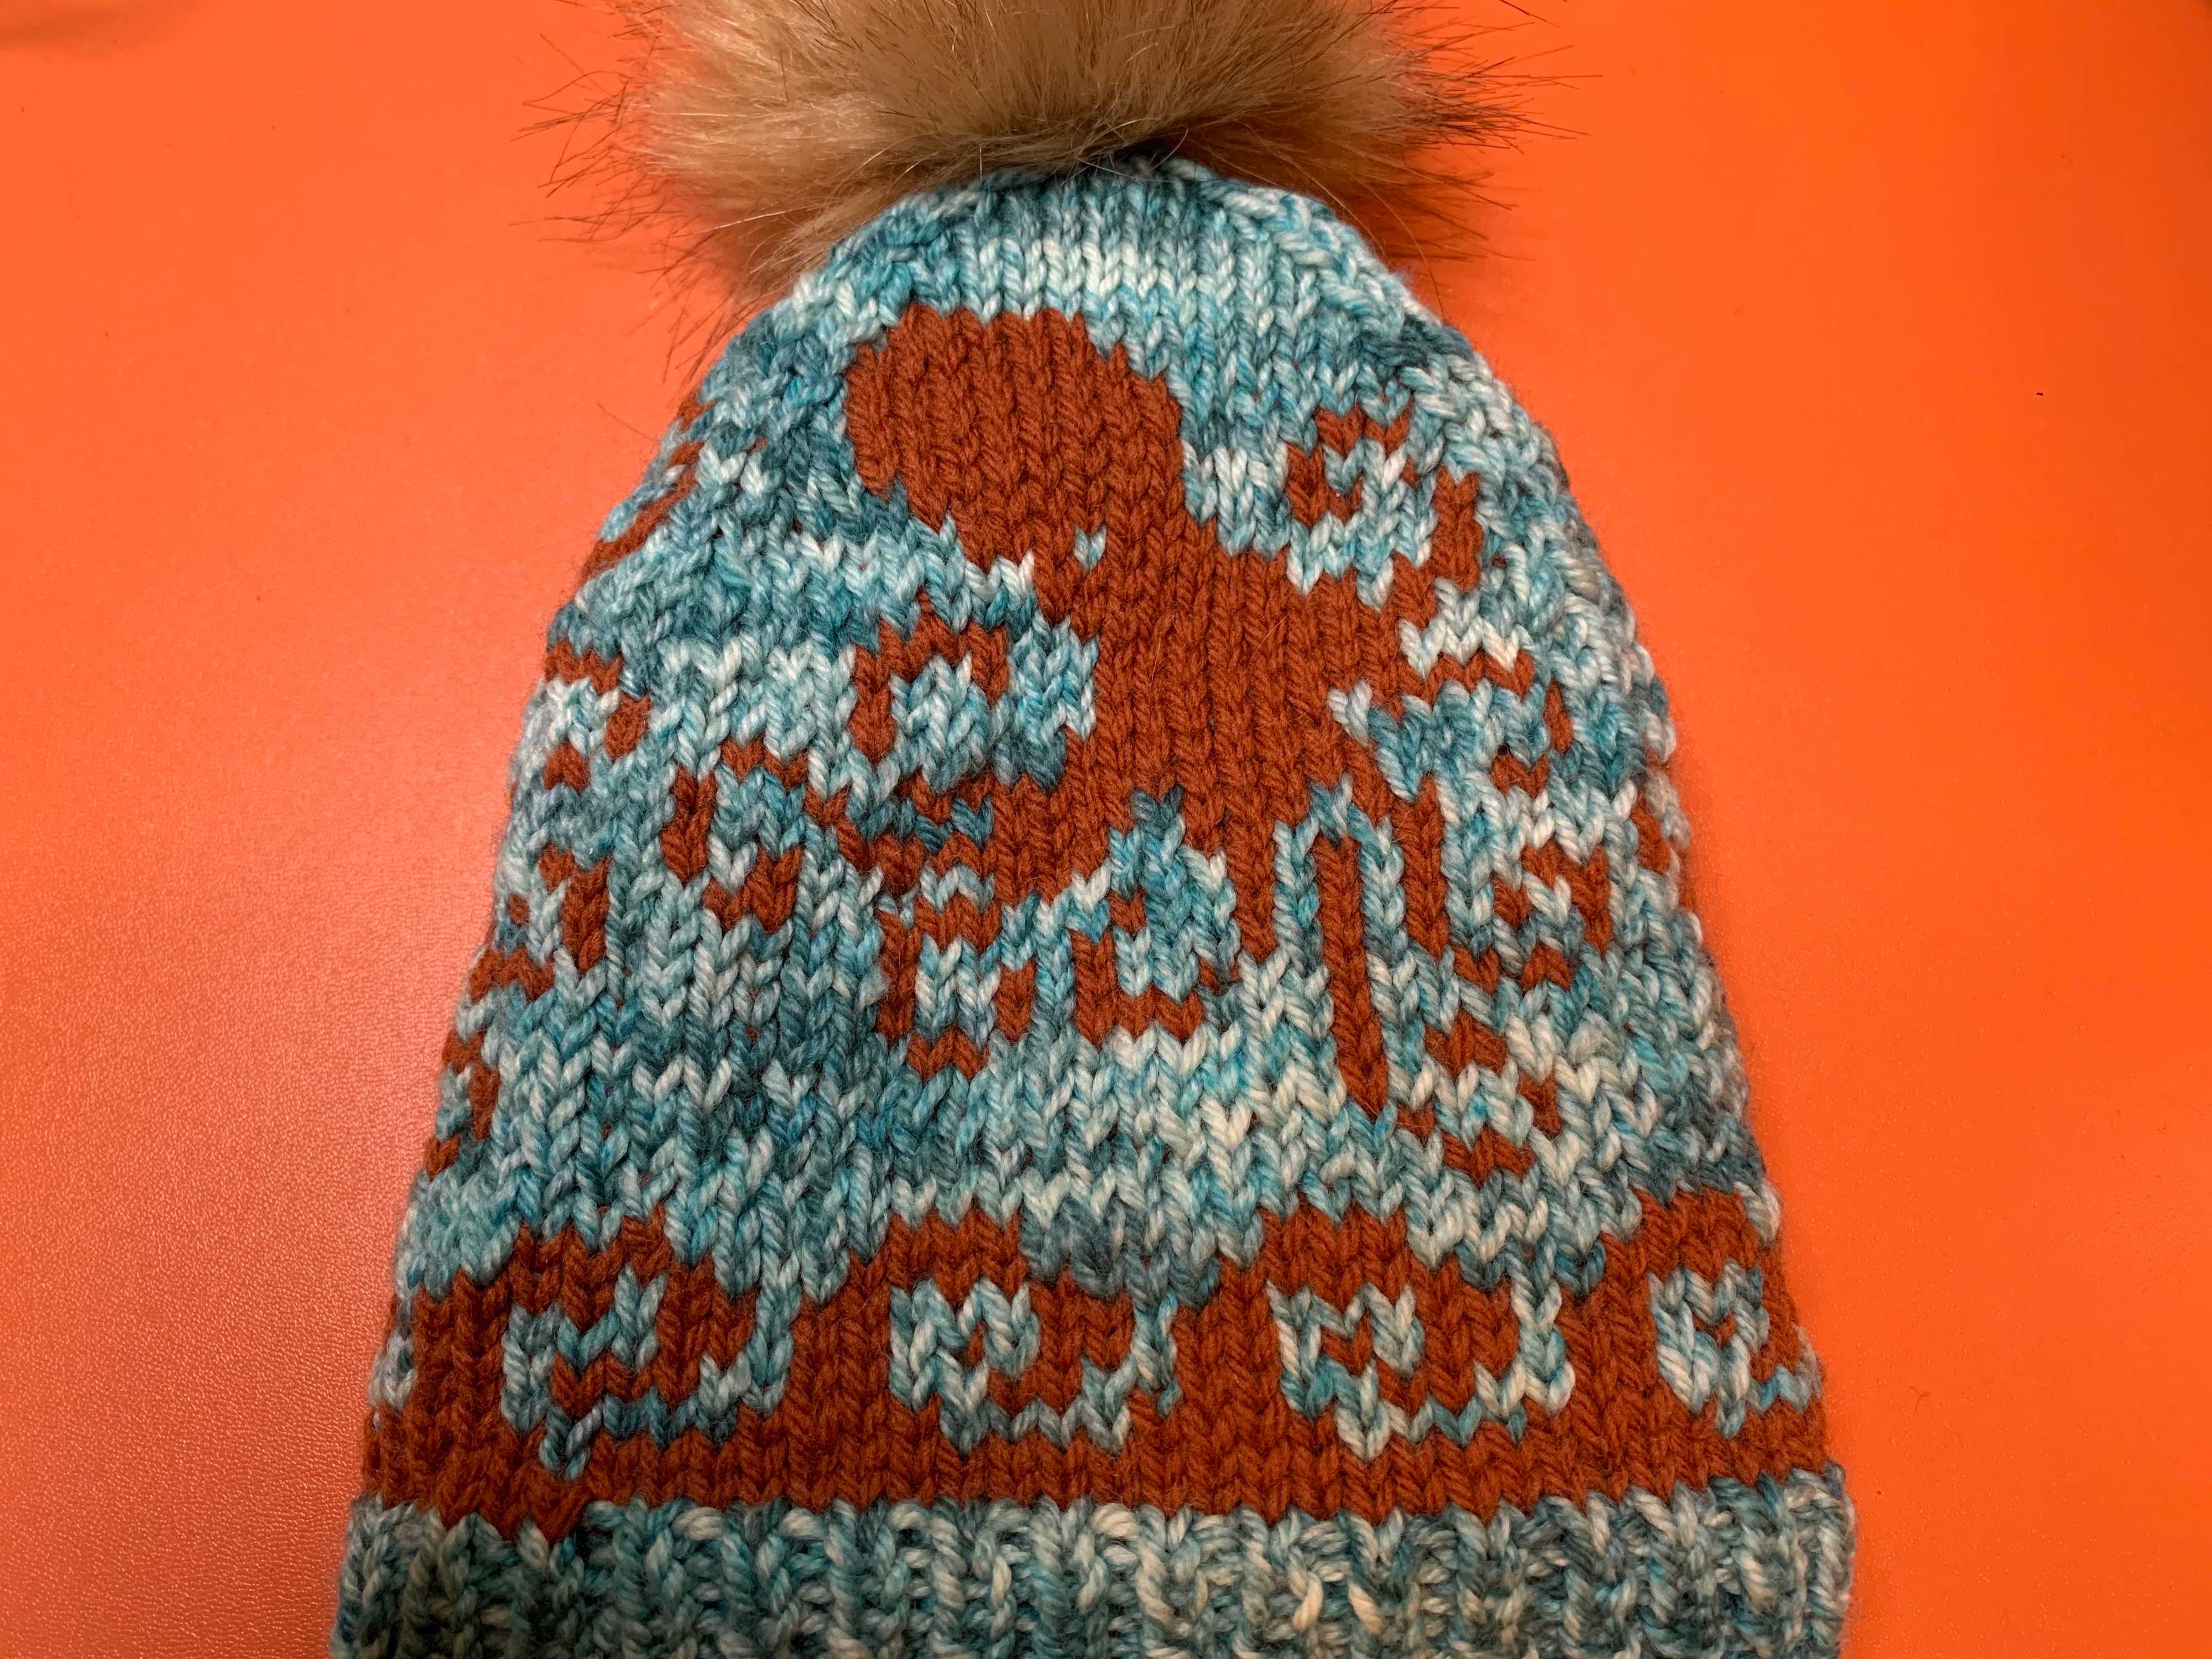 A hat with a colorwork octopus design